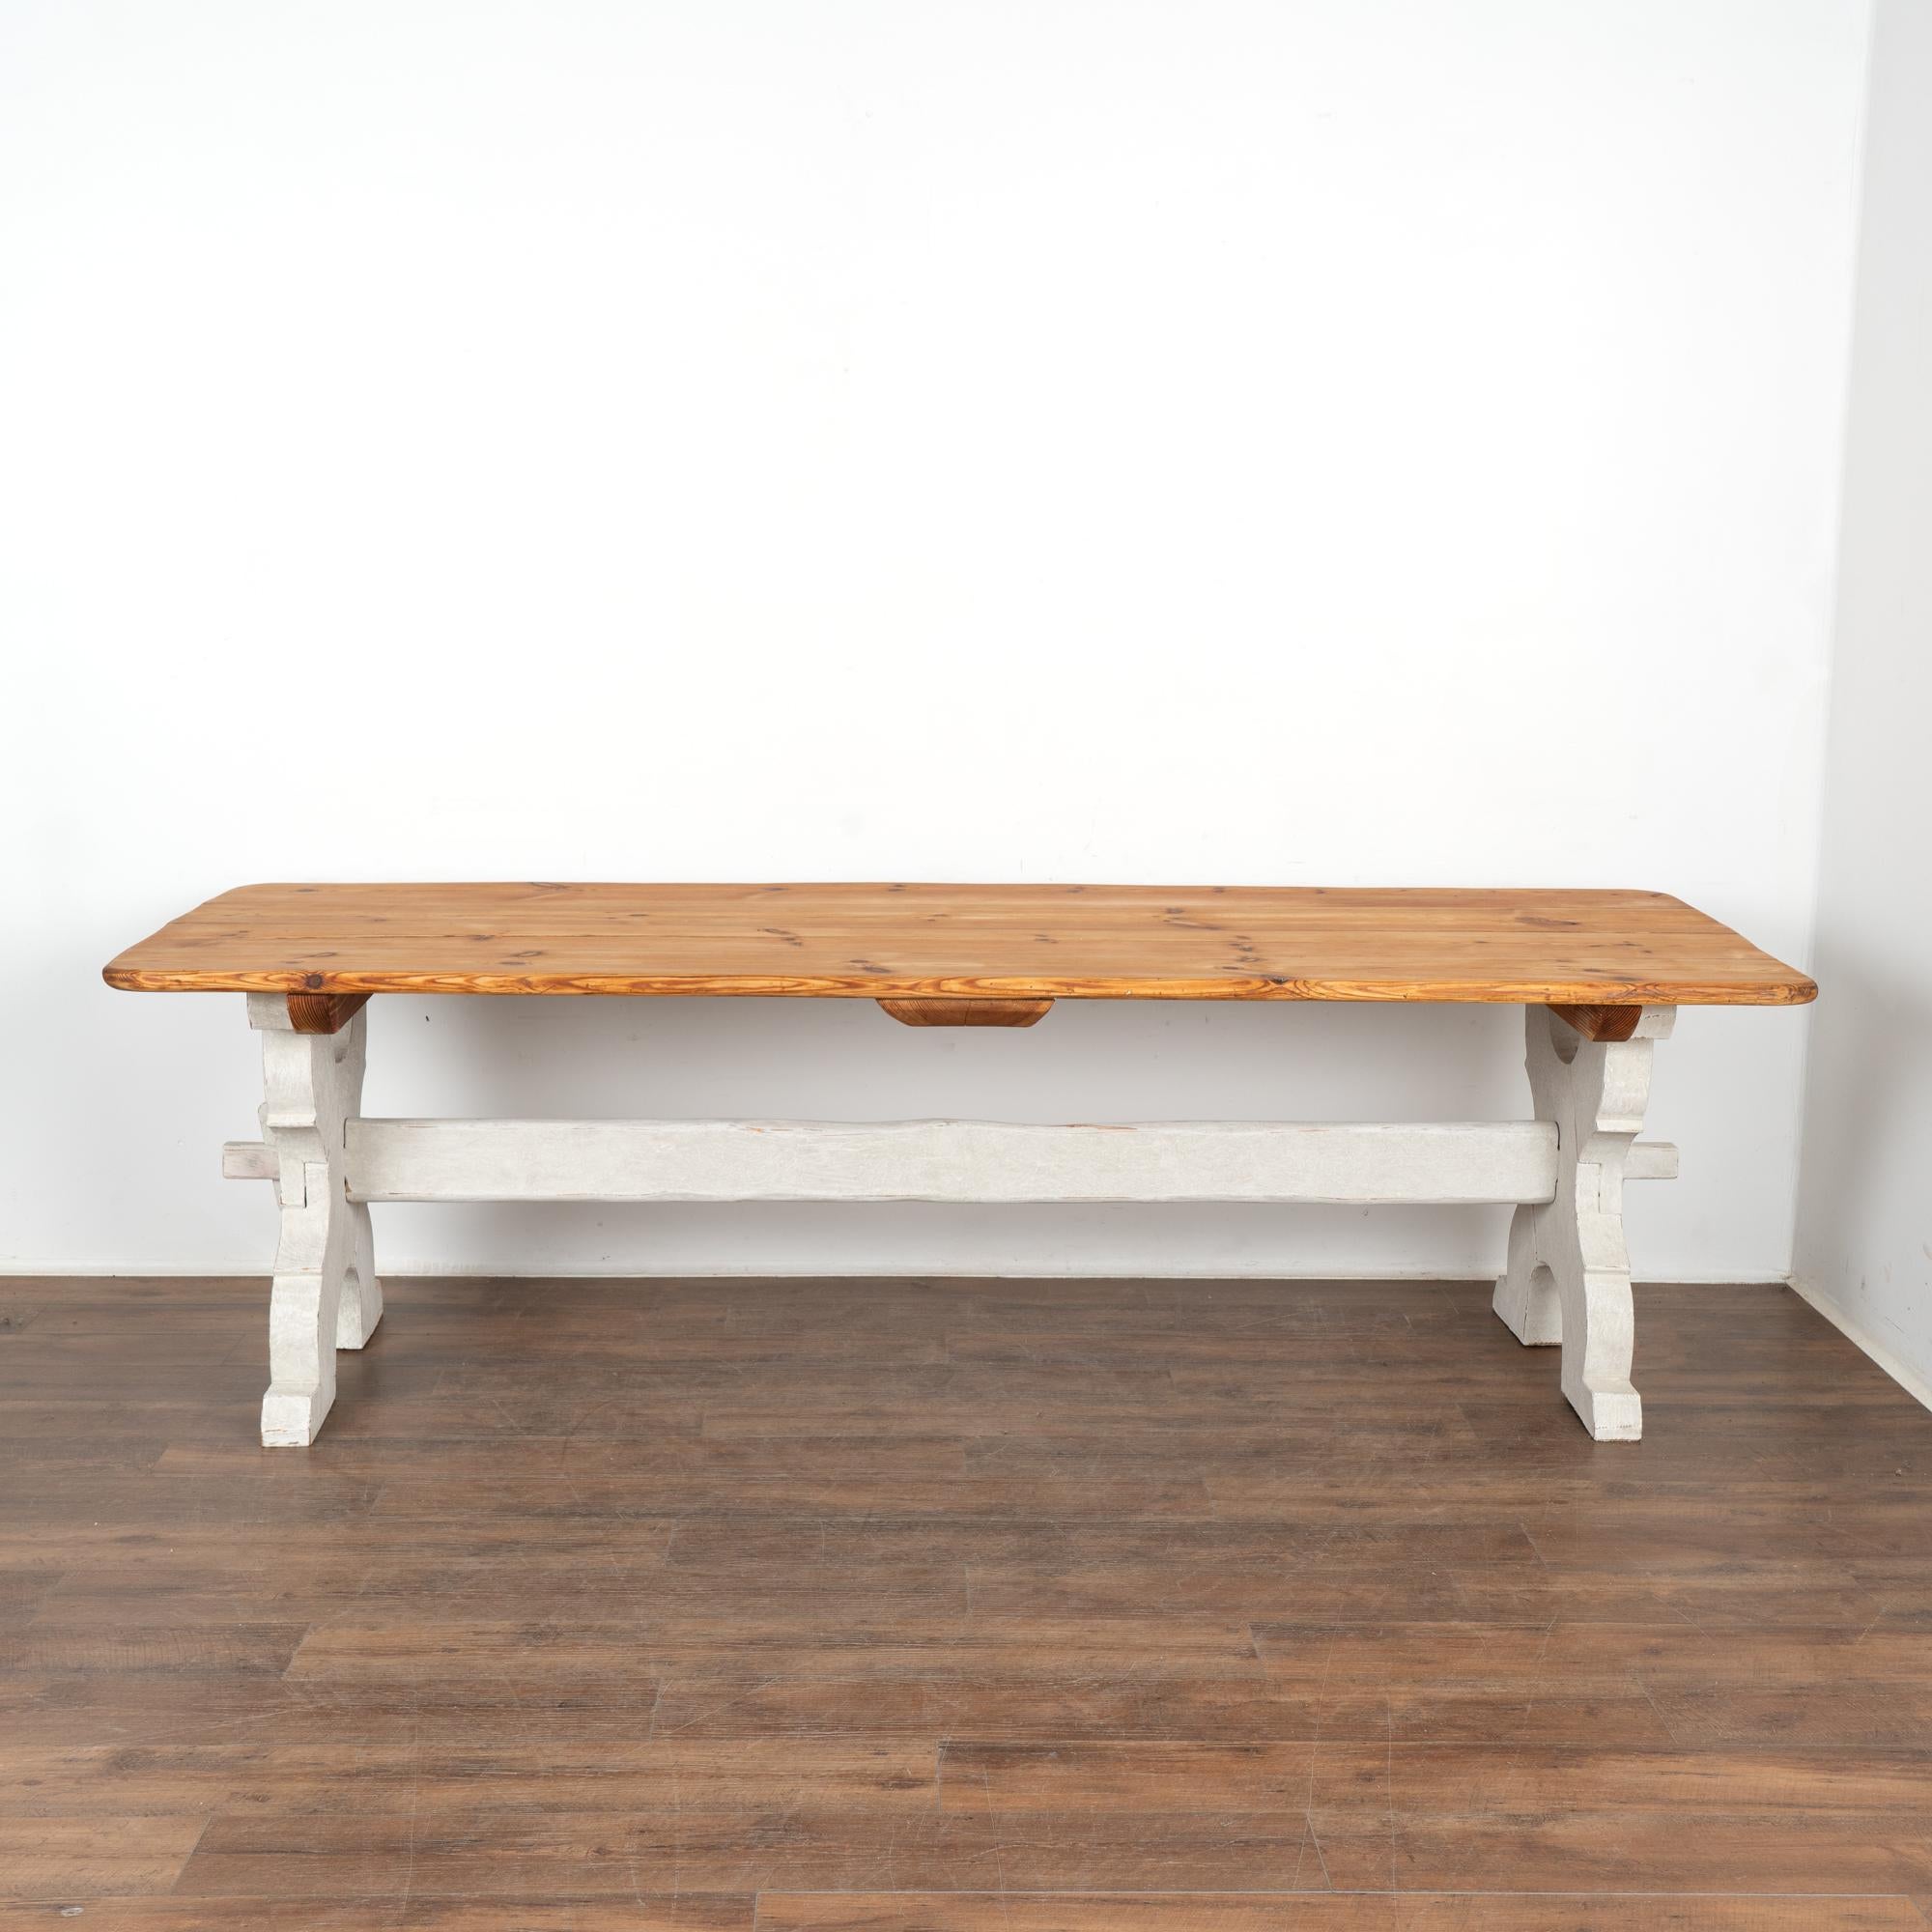 Country White Painted Pine Farm Table, Denmark circa 1840-60 For Sale